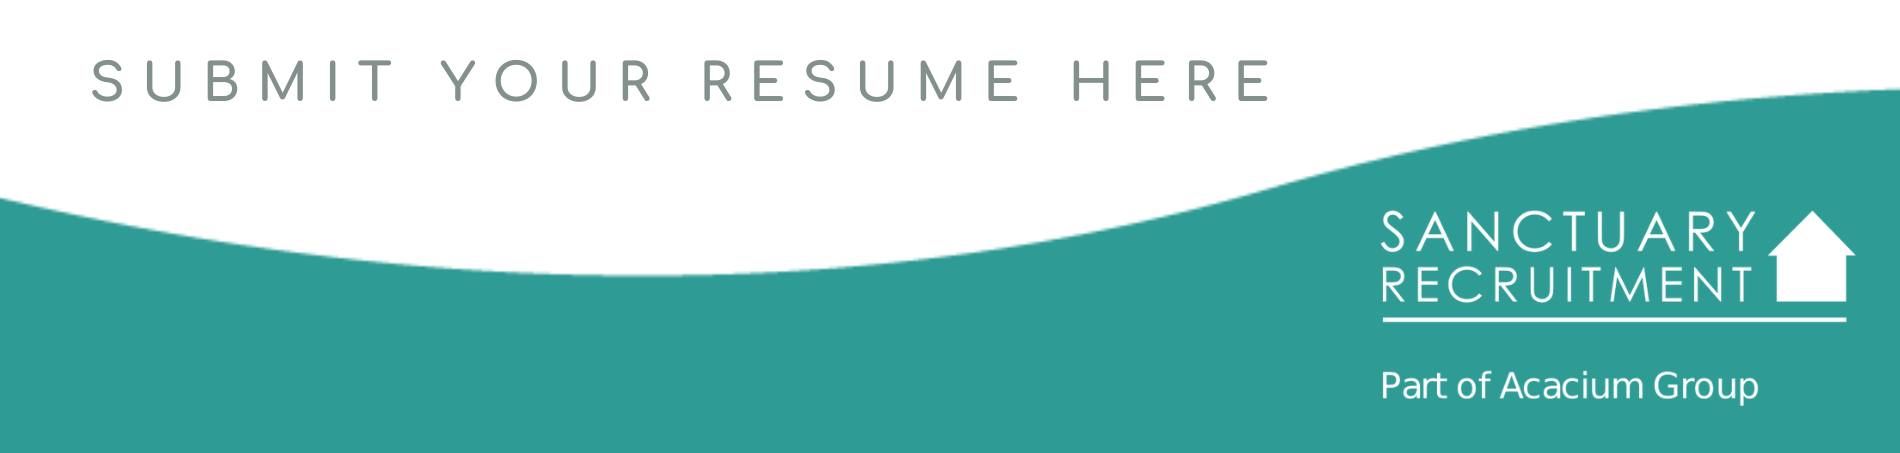 submit your aged care resume here